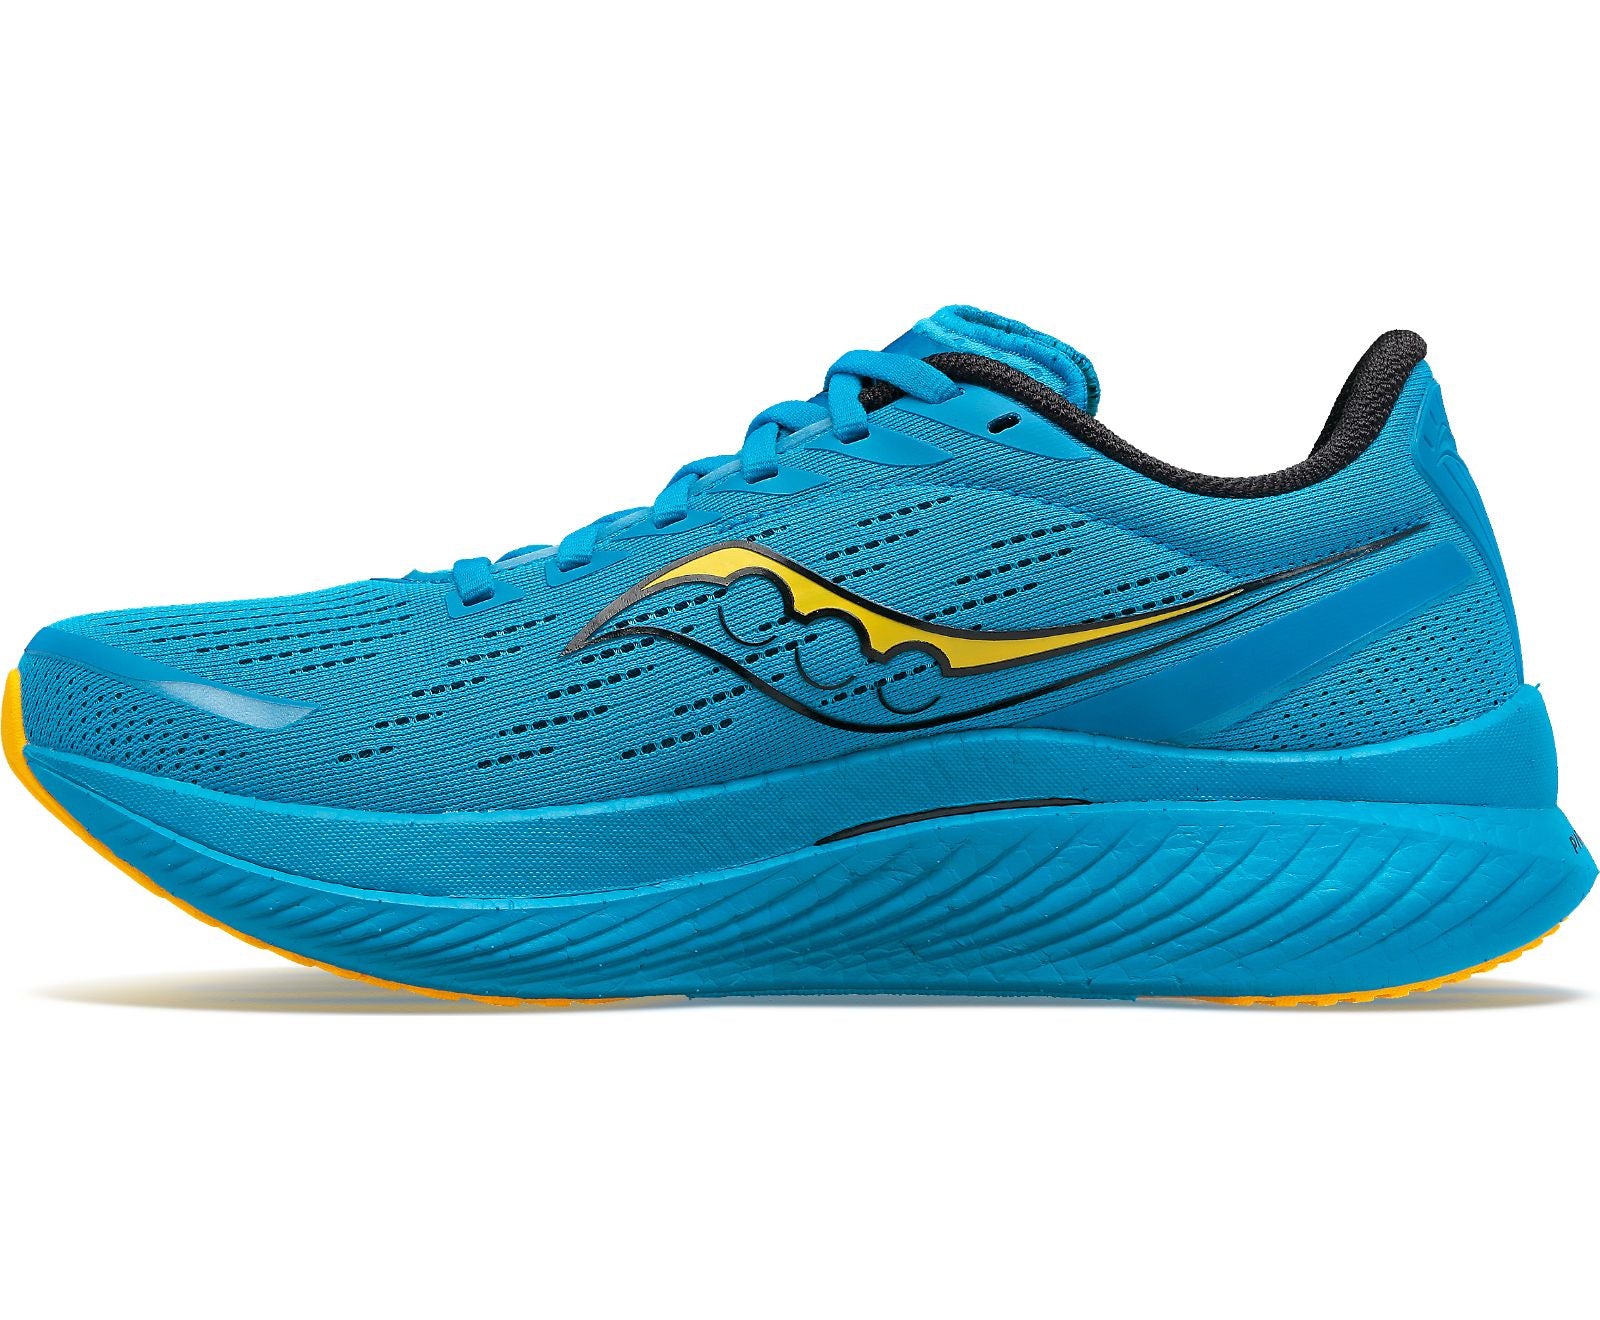 Medial view of the Men's Saucony Endorphin Speed 3 in the color ocean/vizigold